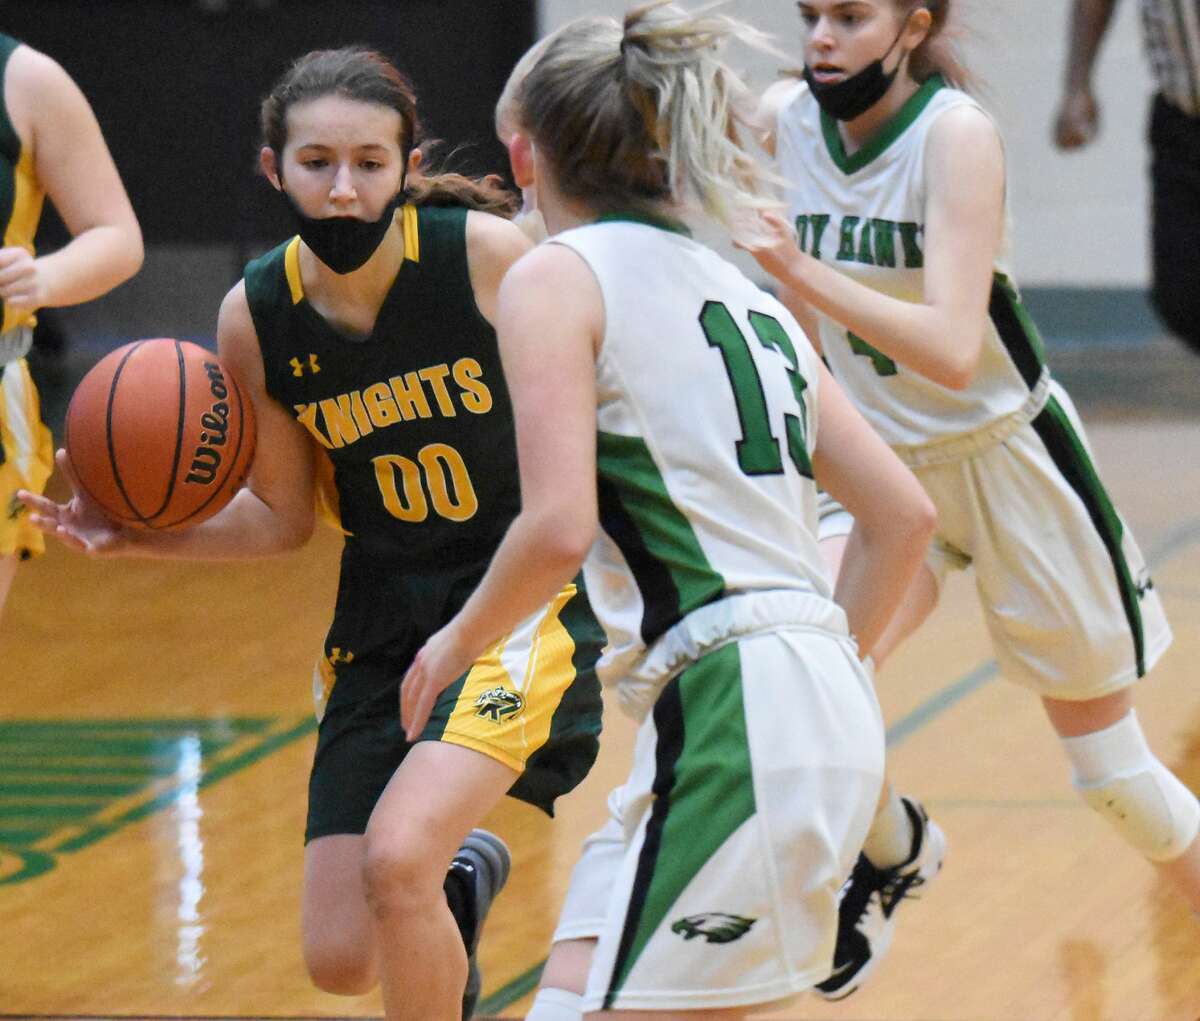 Metro-East Lutheran's Sarah Huber races the ball up the court during the first half against Carrollton on Saturday in Carrollton.